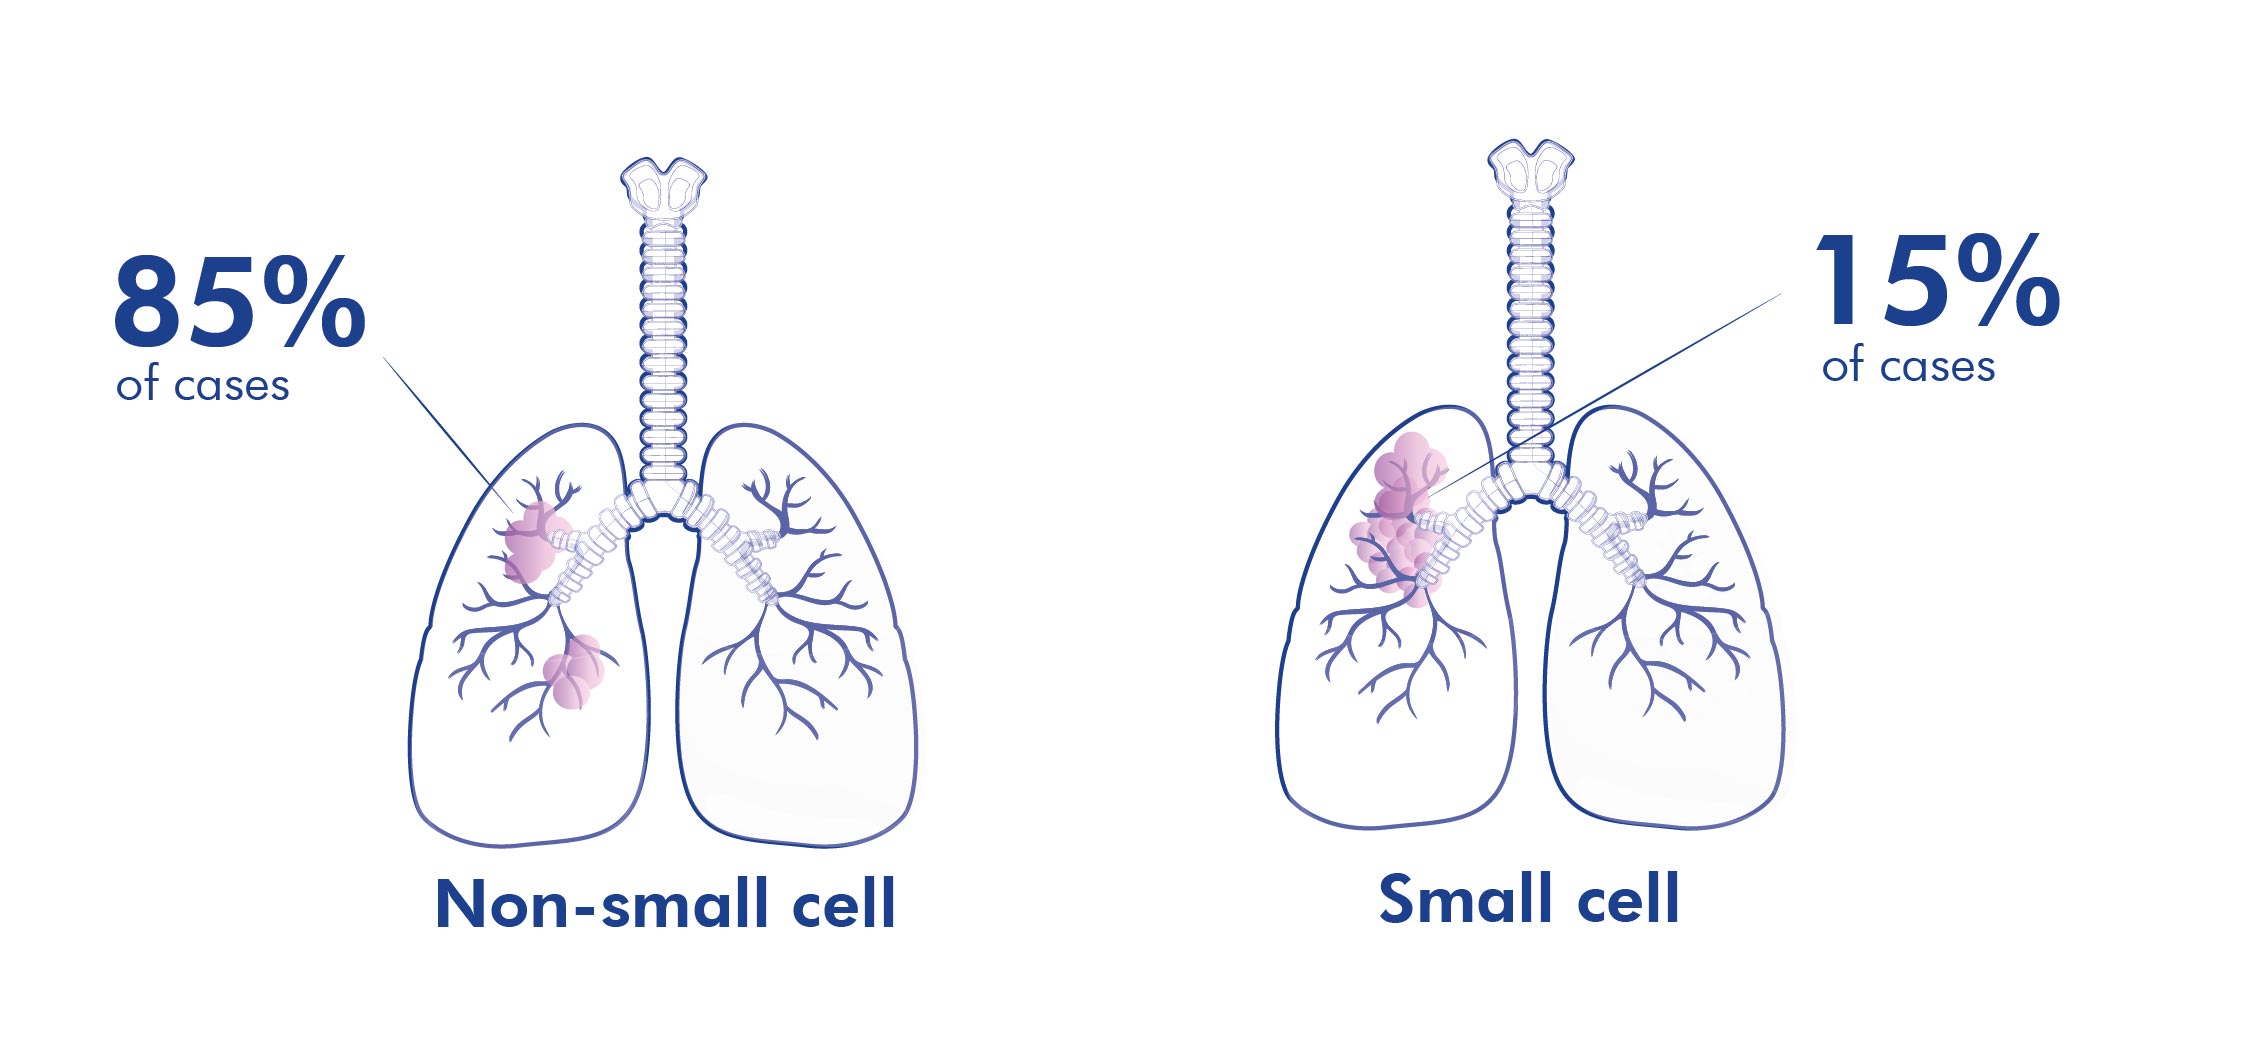 Types of lung cancer